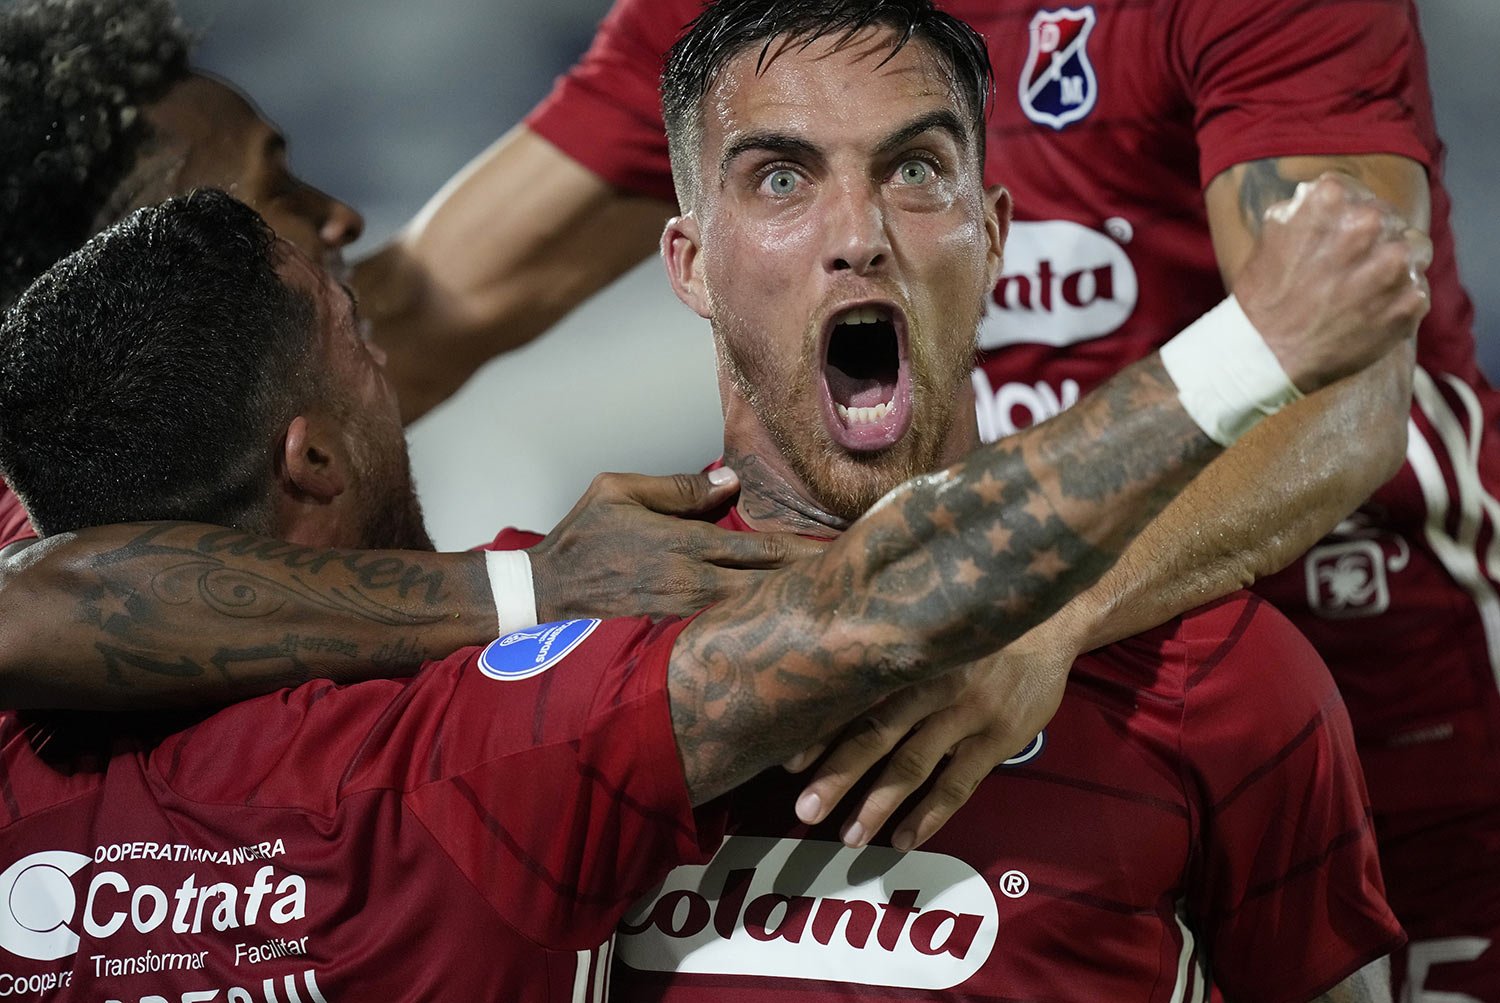  Oscar Mendez of Colombia's Independiente Medellin celebrates after teammate Adrian Arregui scored their side's second goal against Paraguay's Guairena FC at a Copa Sudamericana soccer match in Asuncion, Paraguay, April 7, 2022. (AP Photo/Jorge Saenz